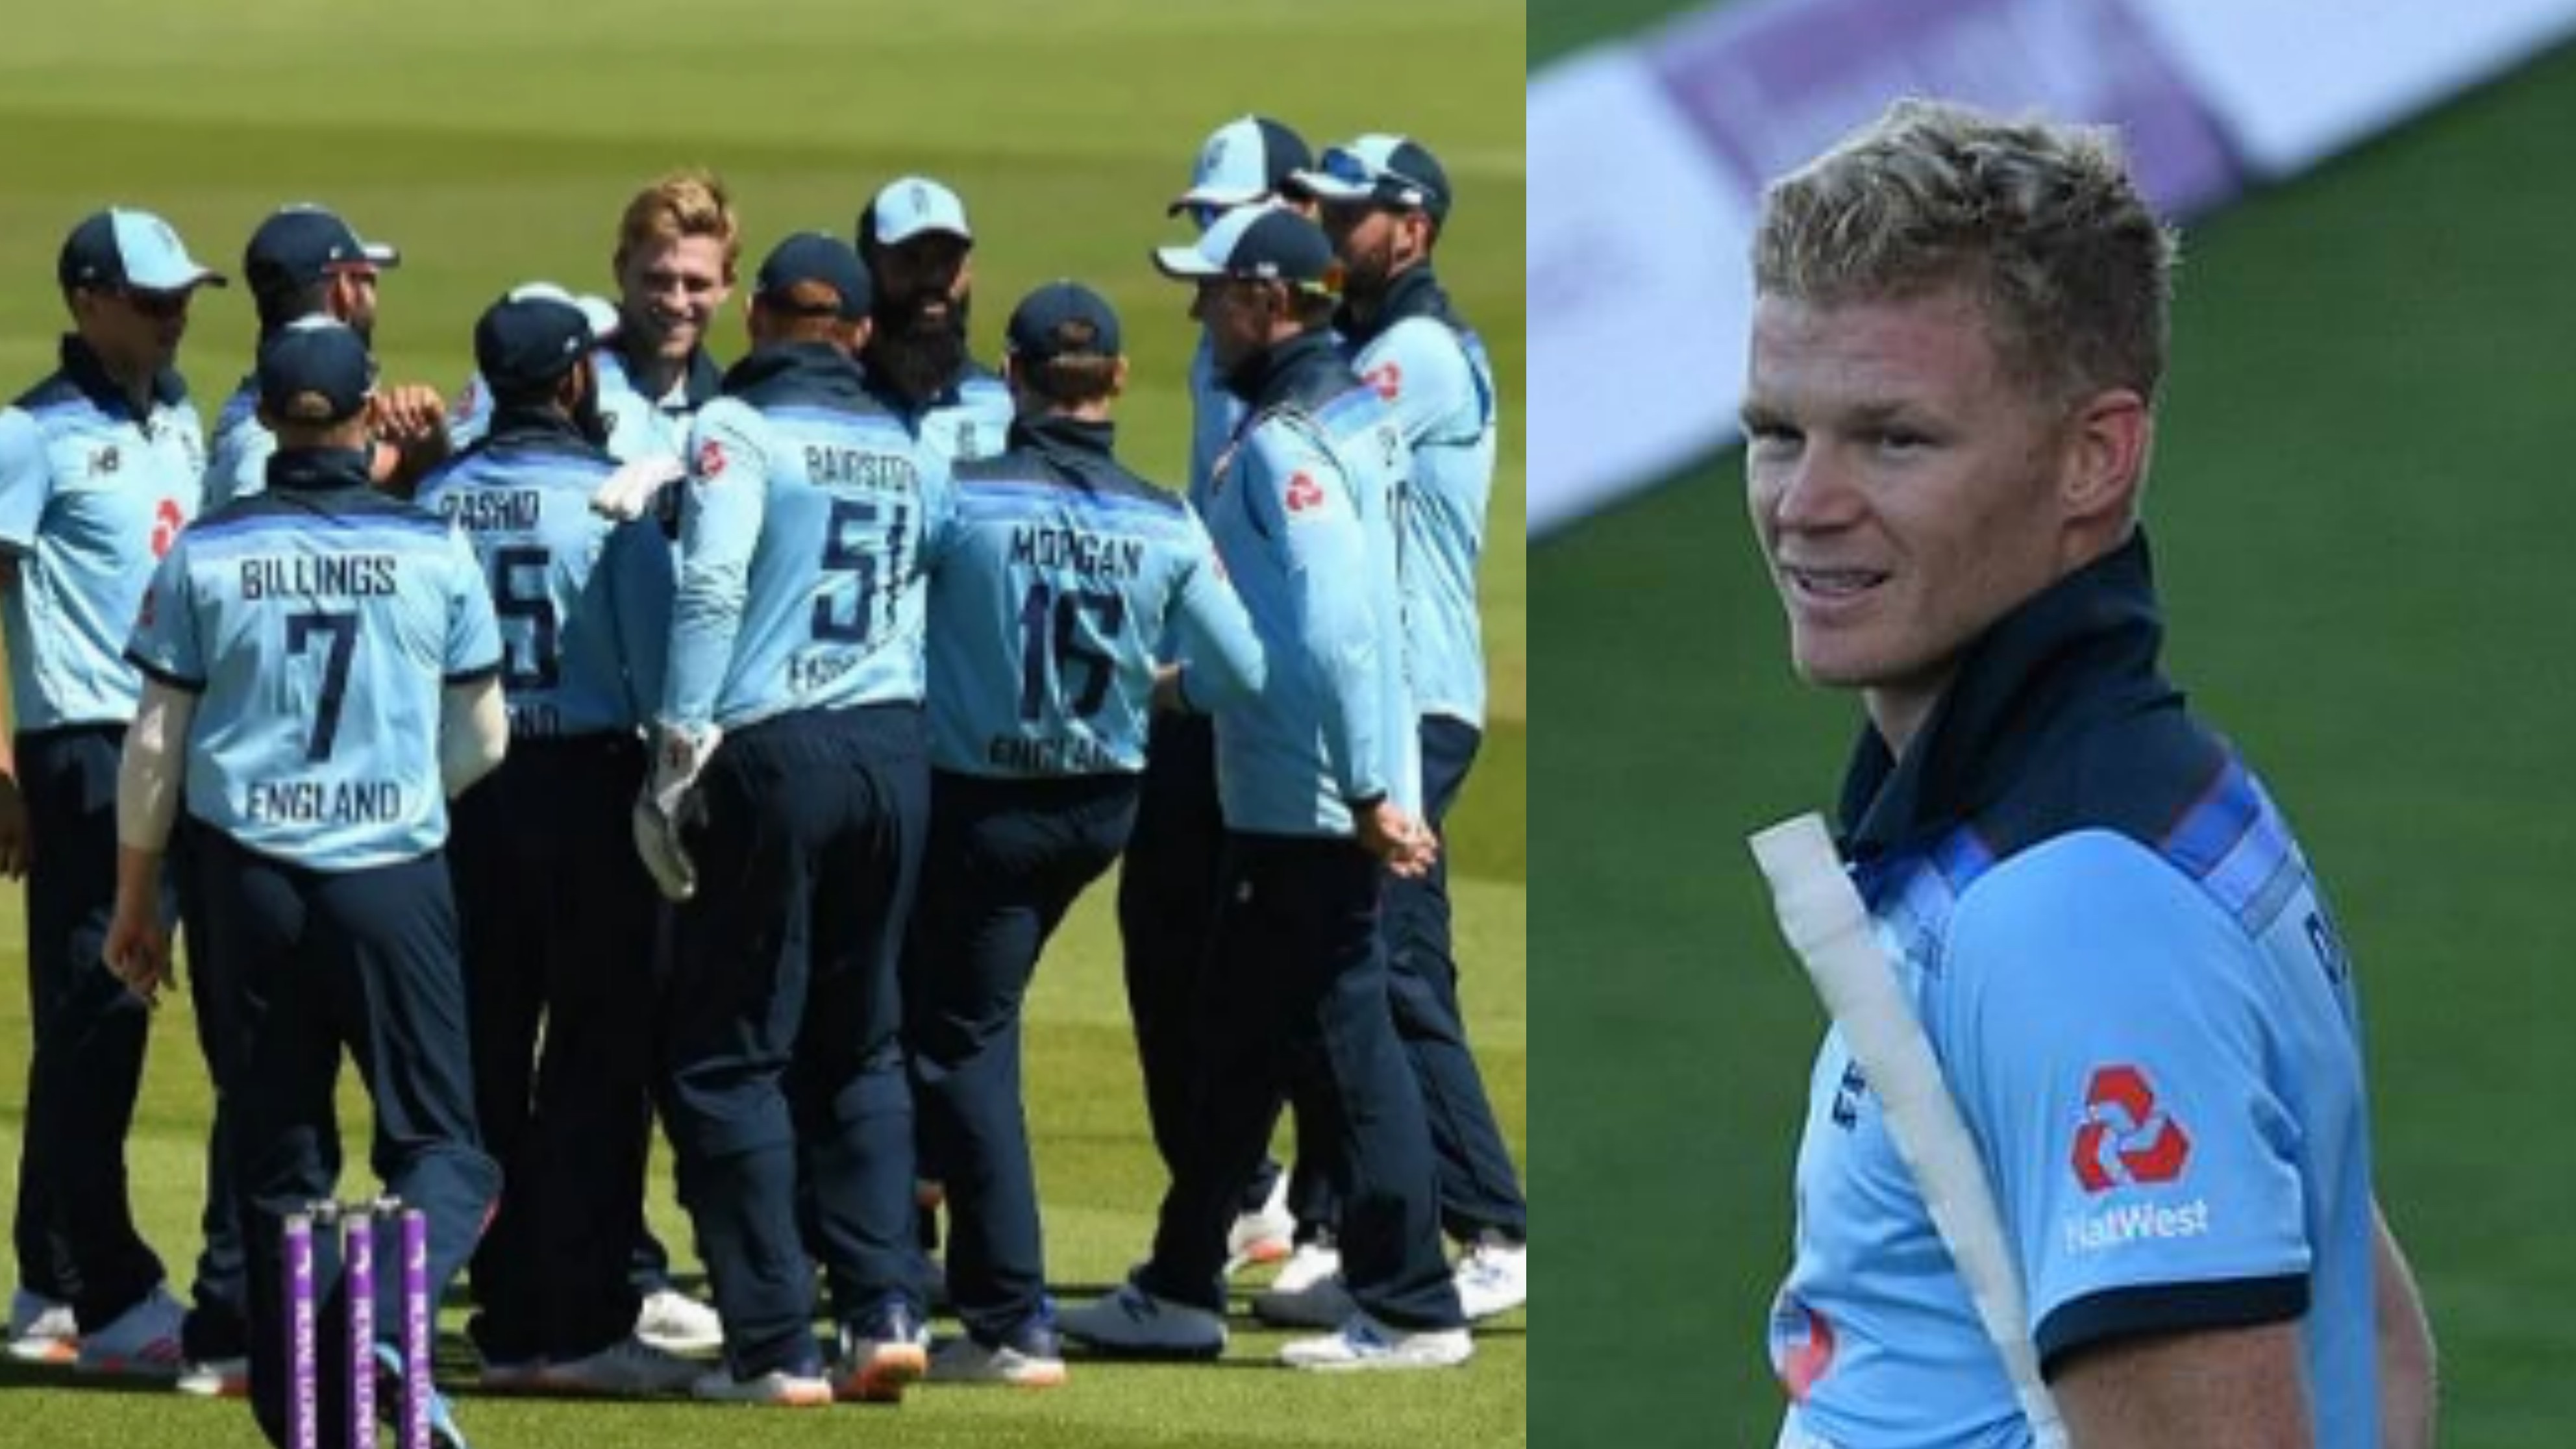 ENG v IRE 2020: Sam Billings keen to cement place in England ODI team to prolong career 